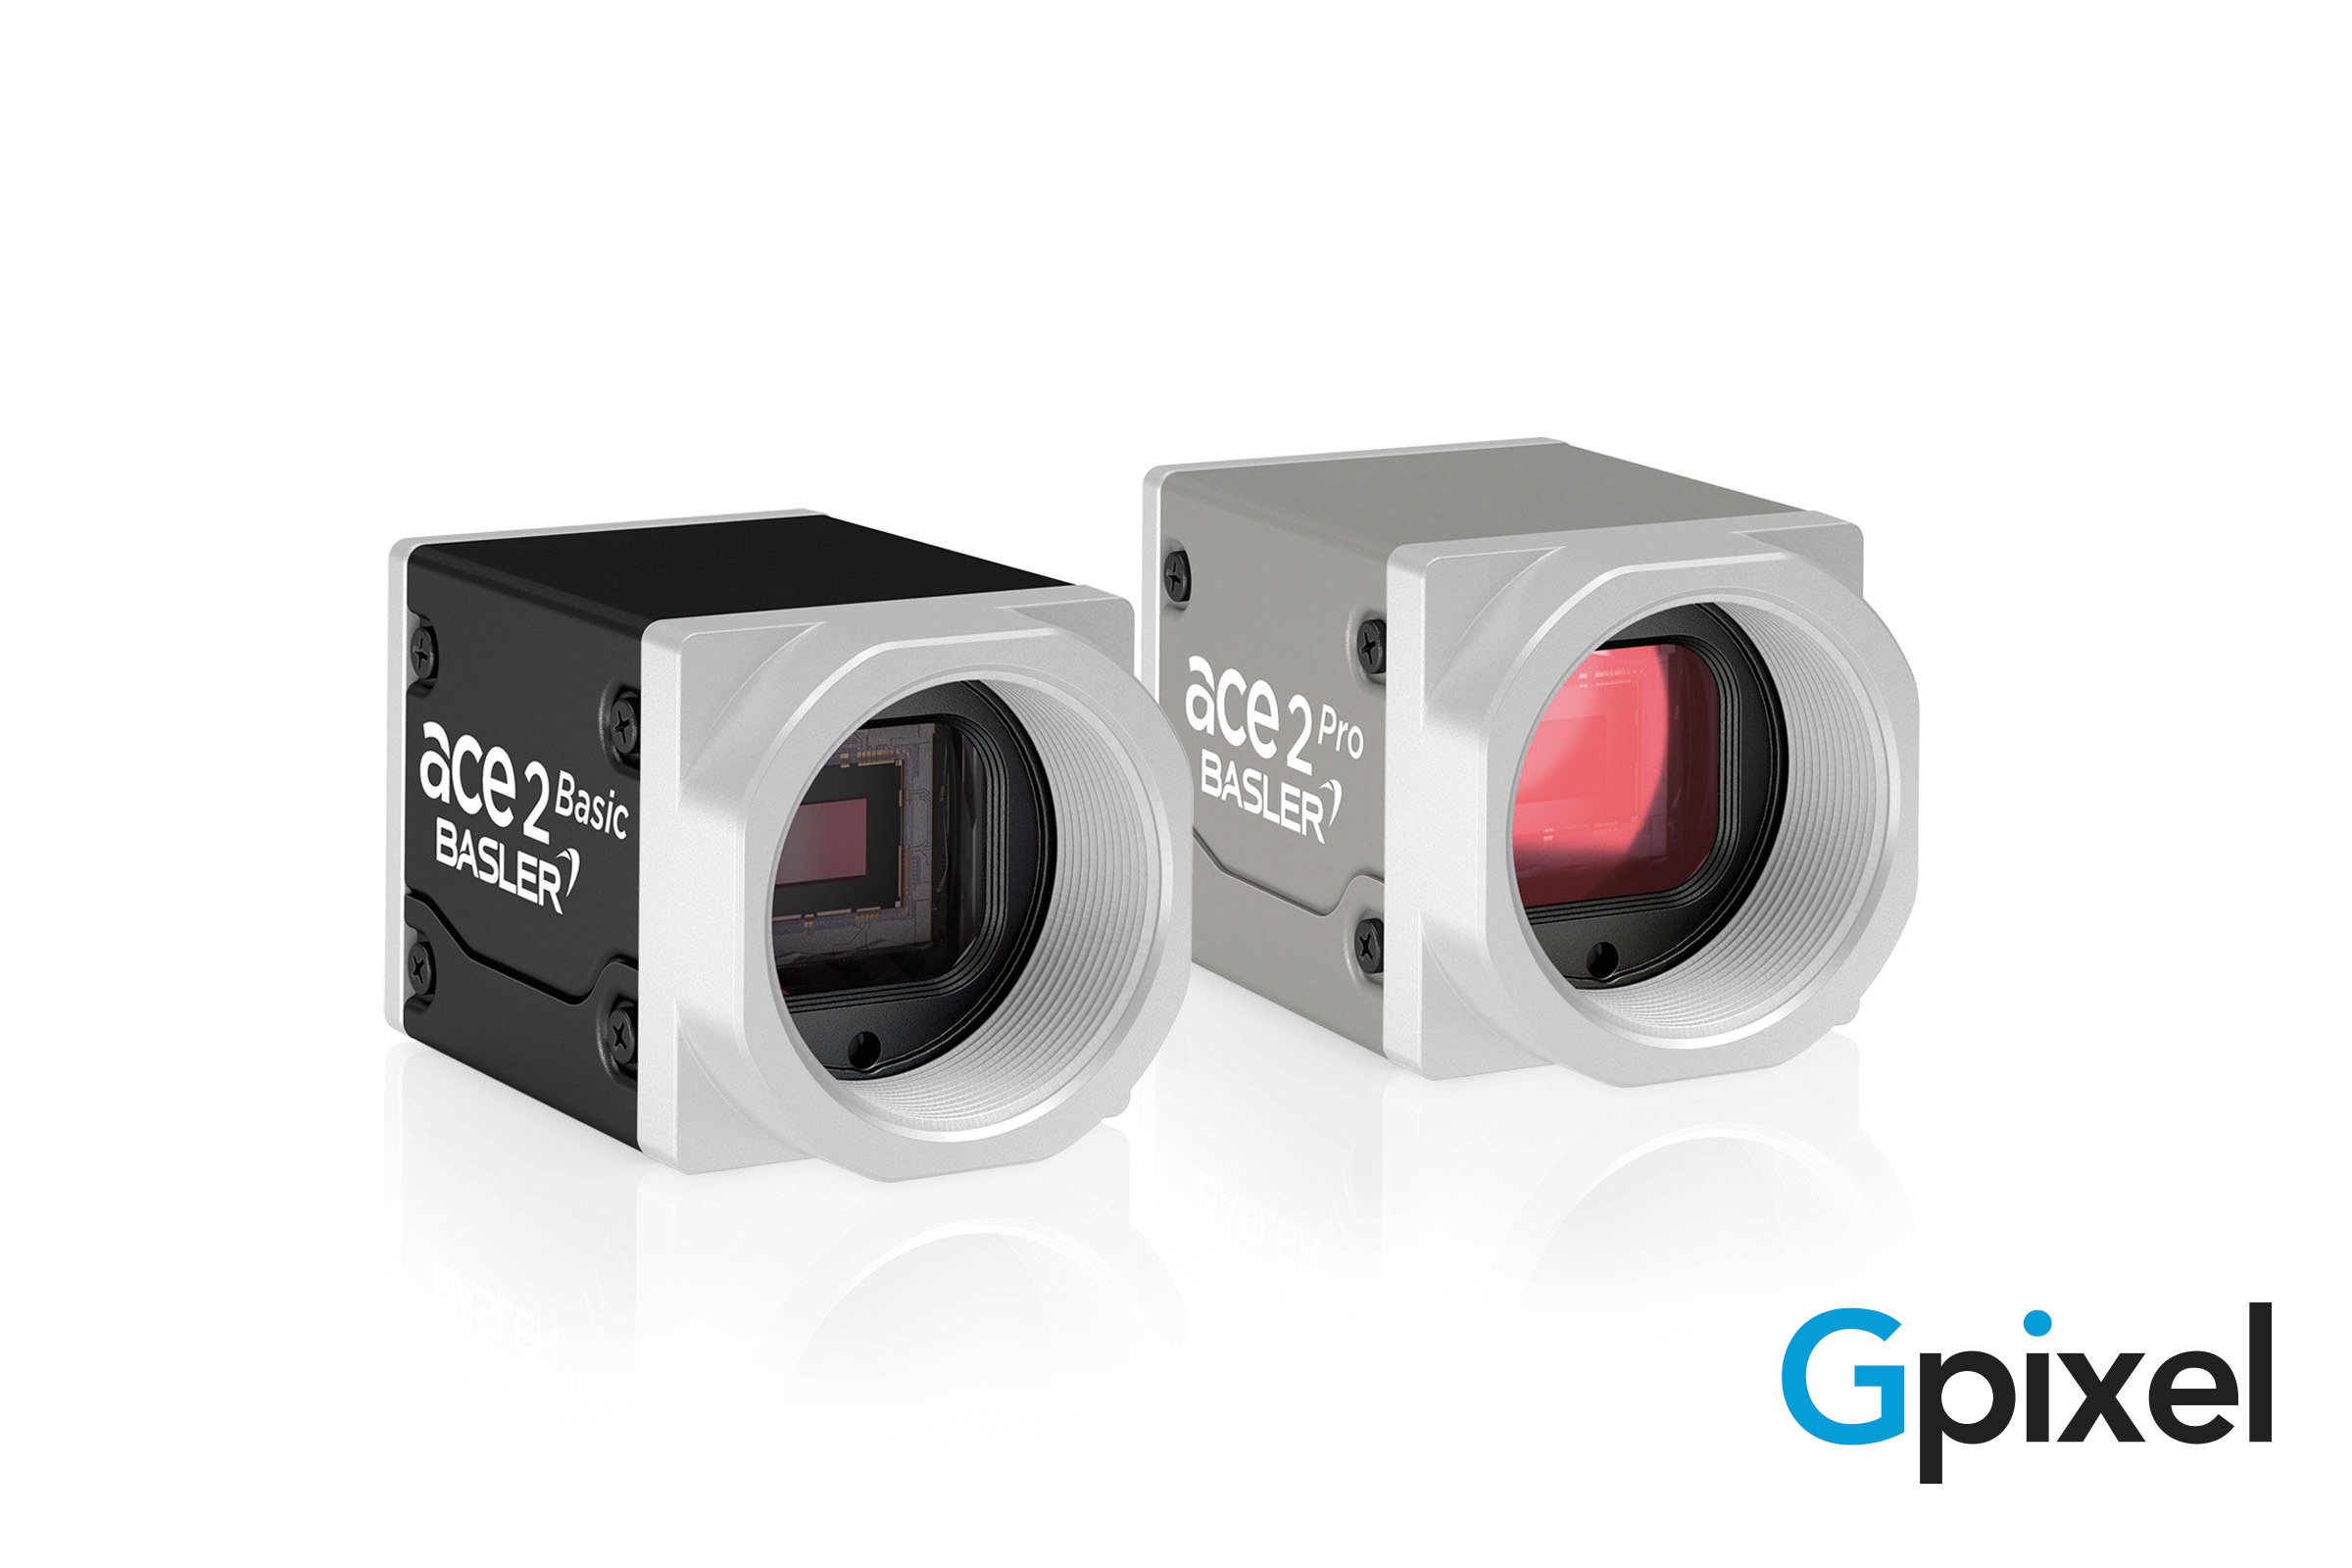 A good mix of performance and price: Basler's ace 2 Gpixel cameras